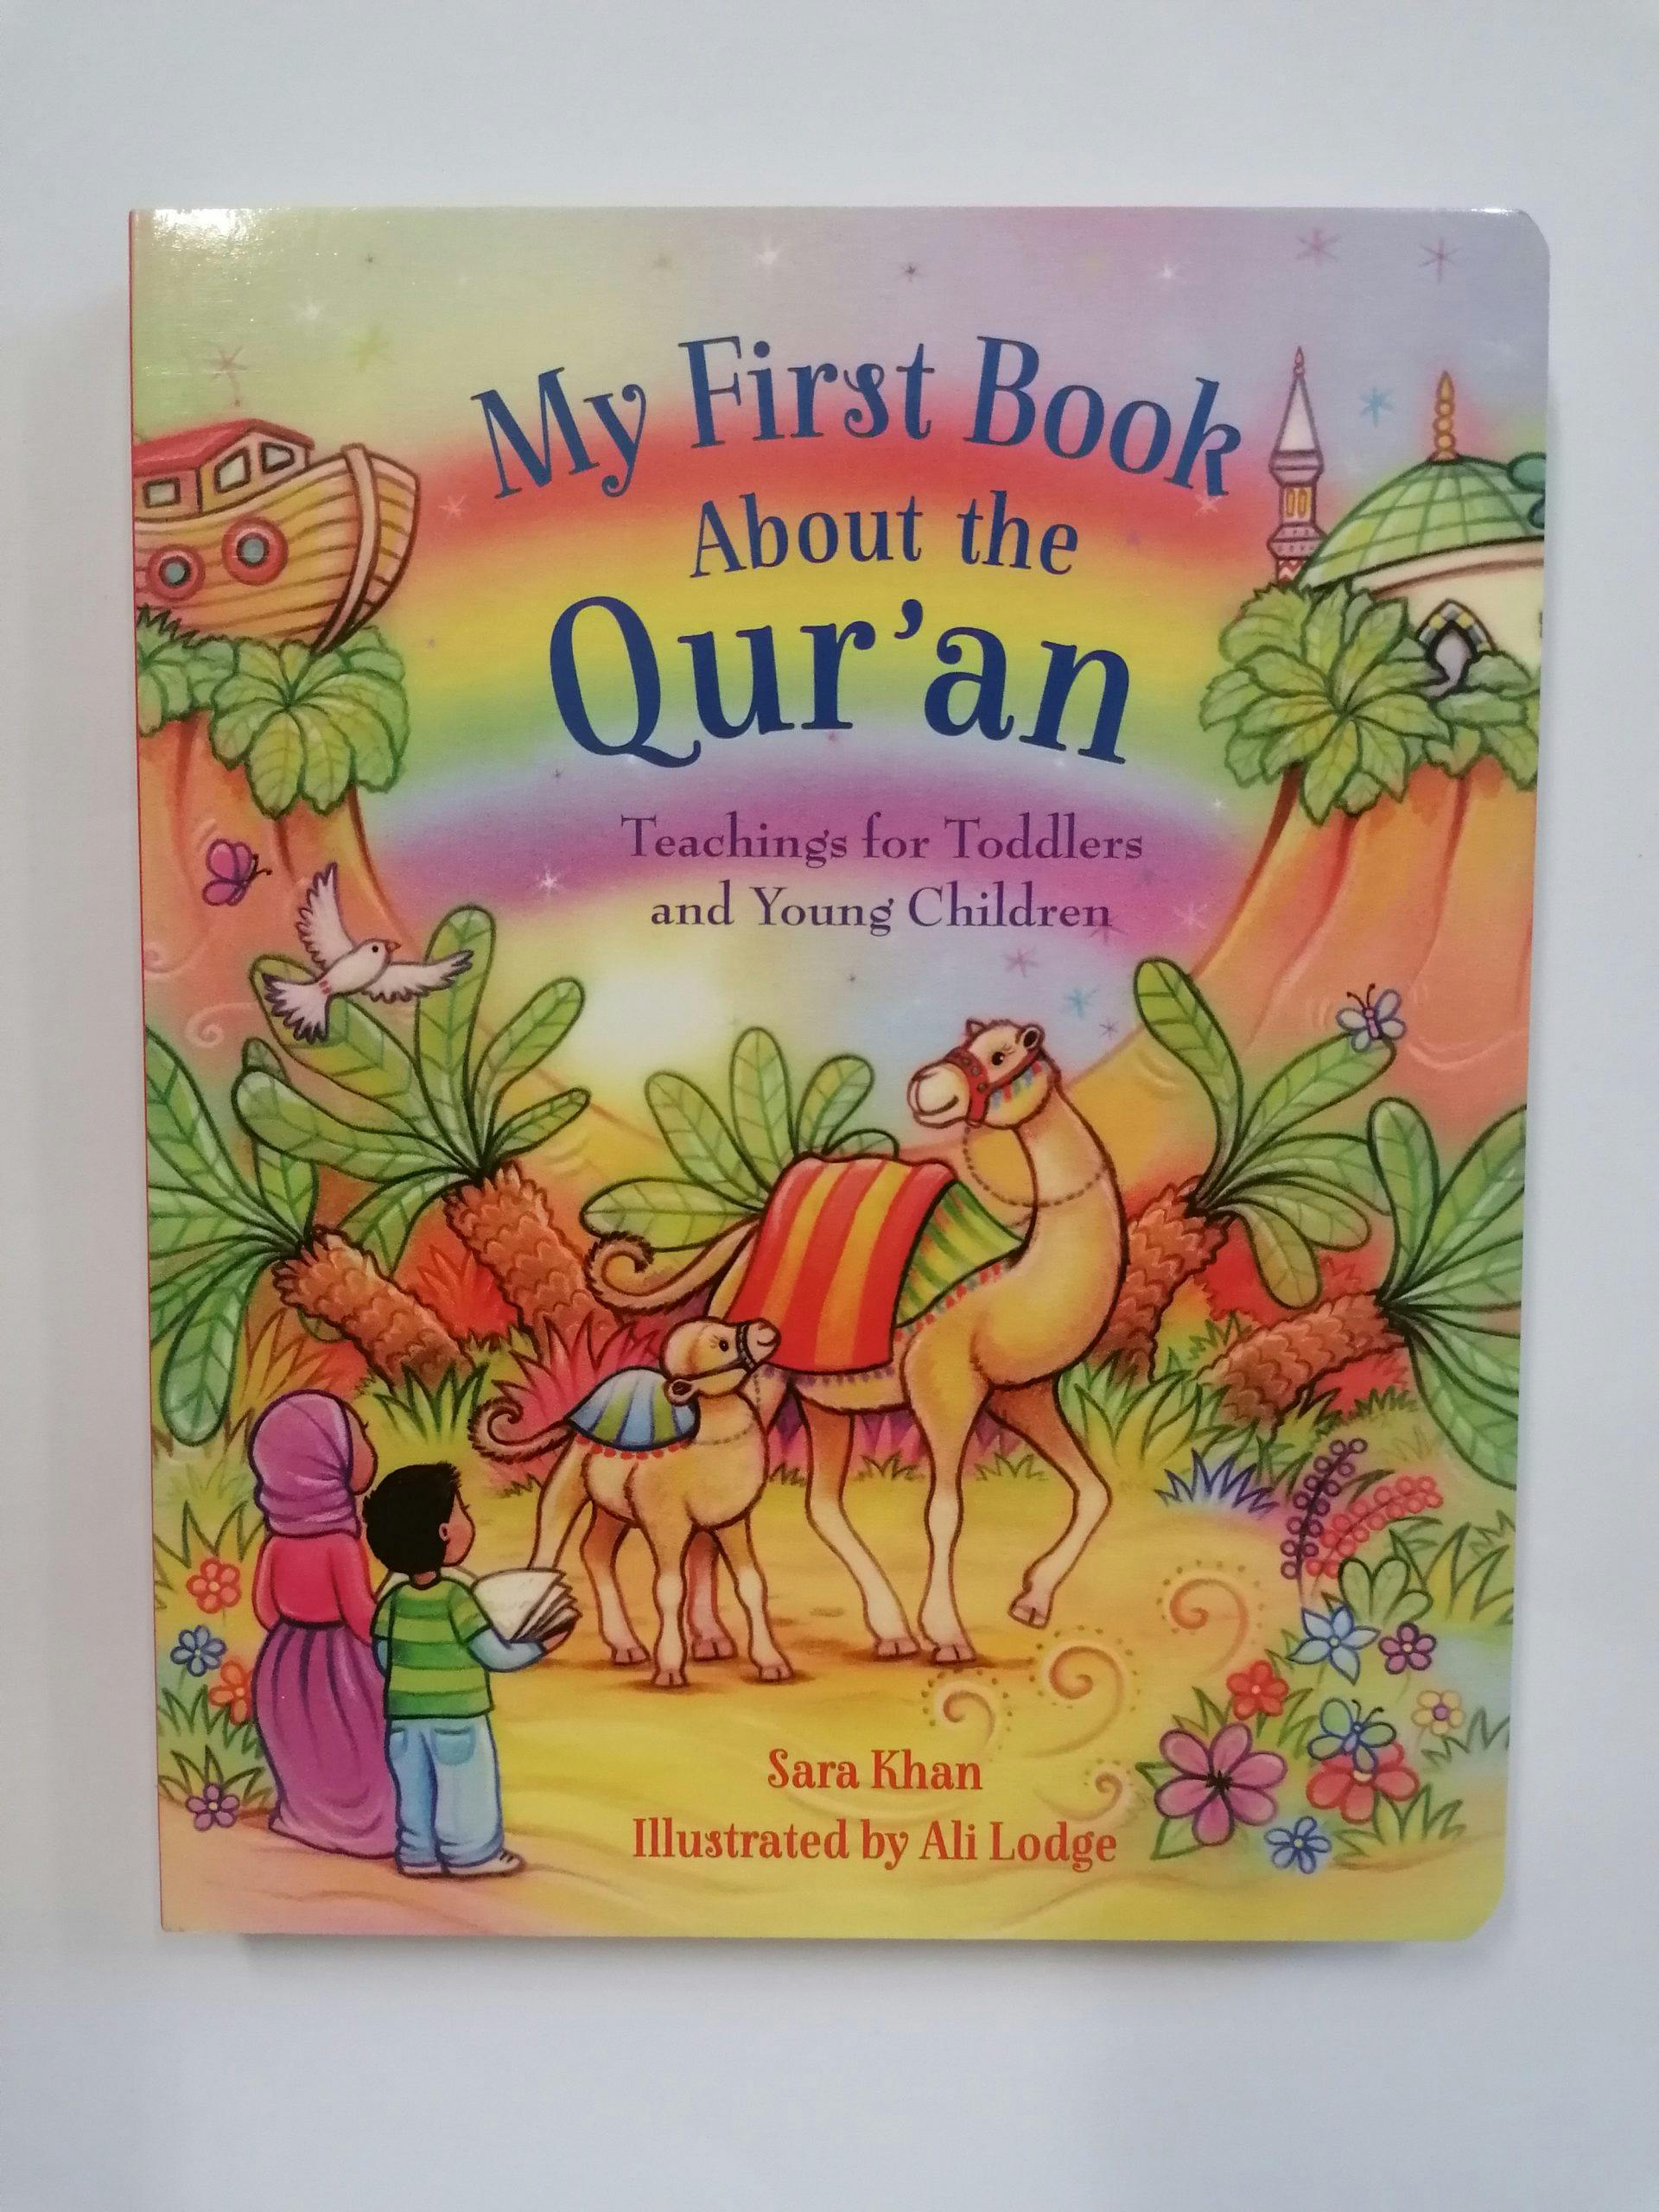 Featured image of My First Book About Qur'an